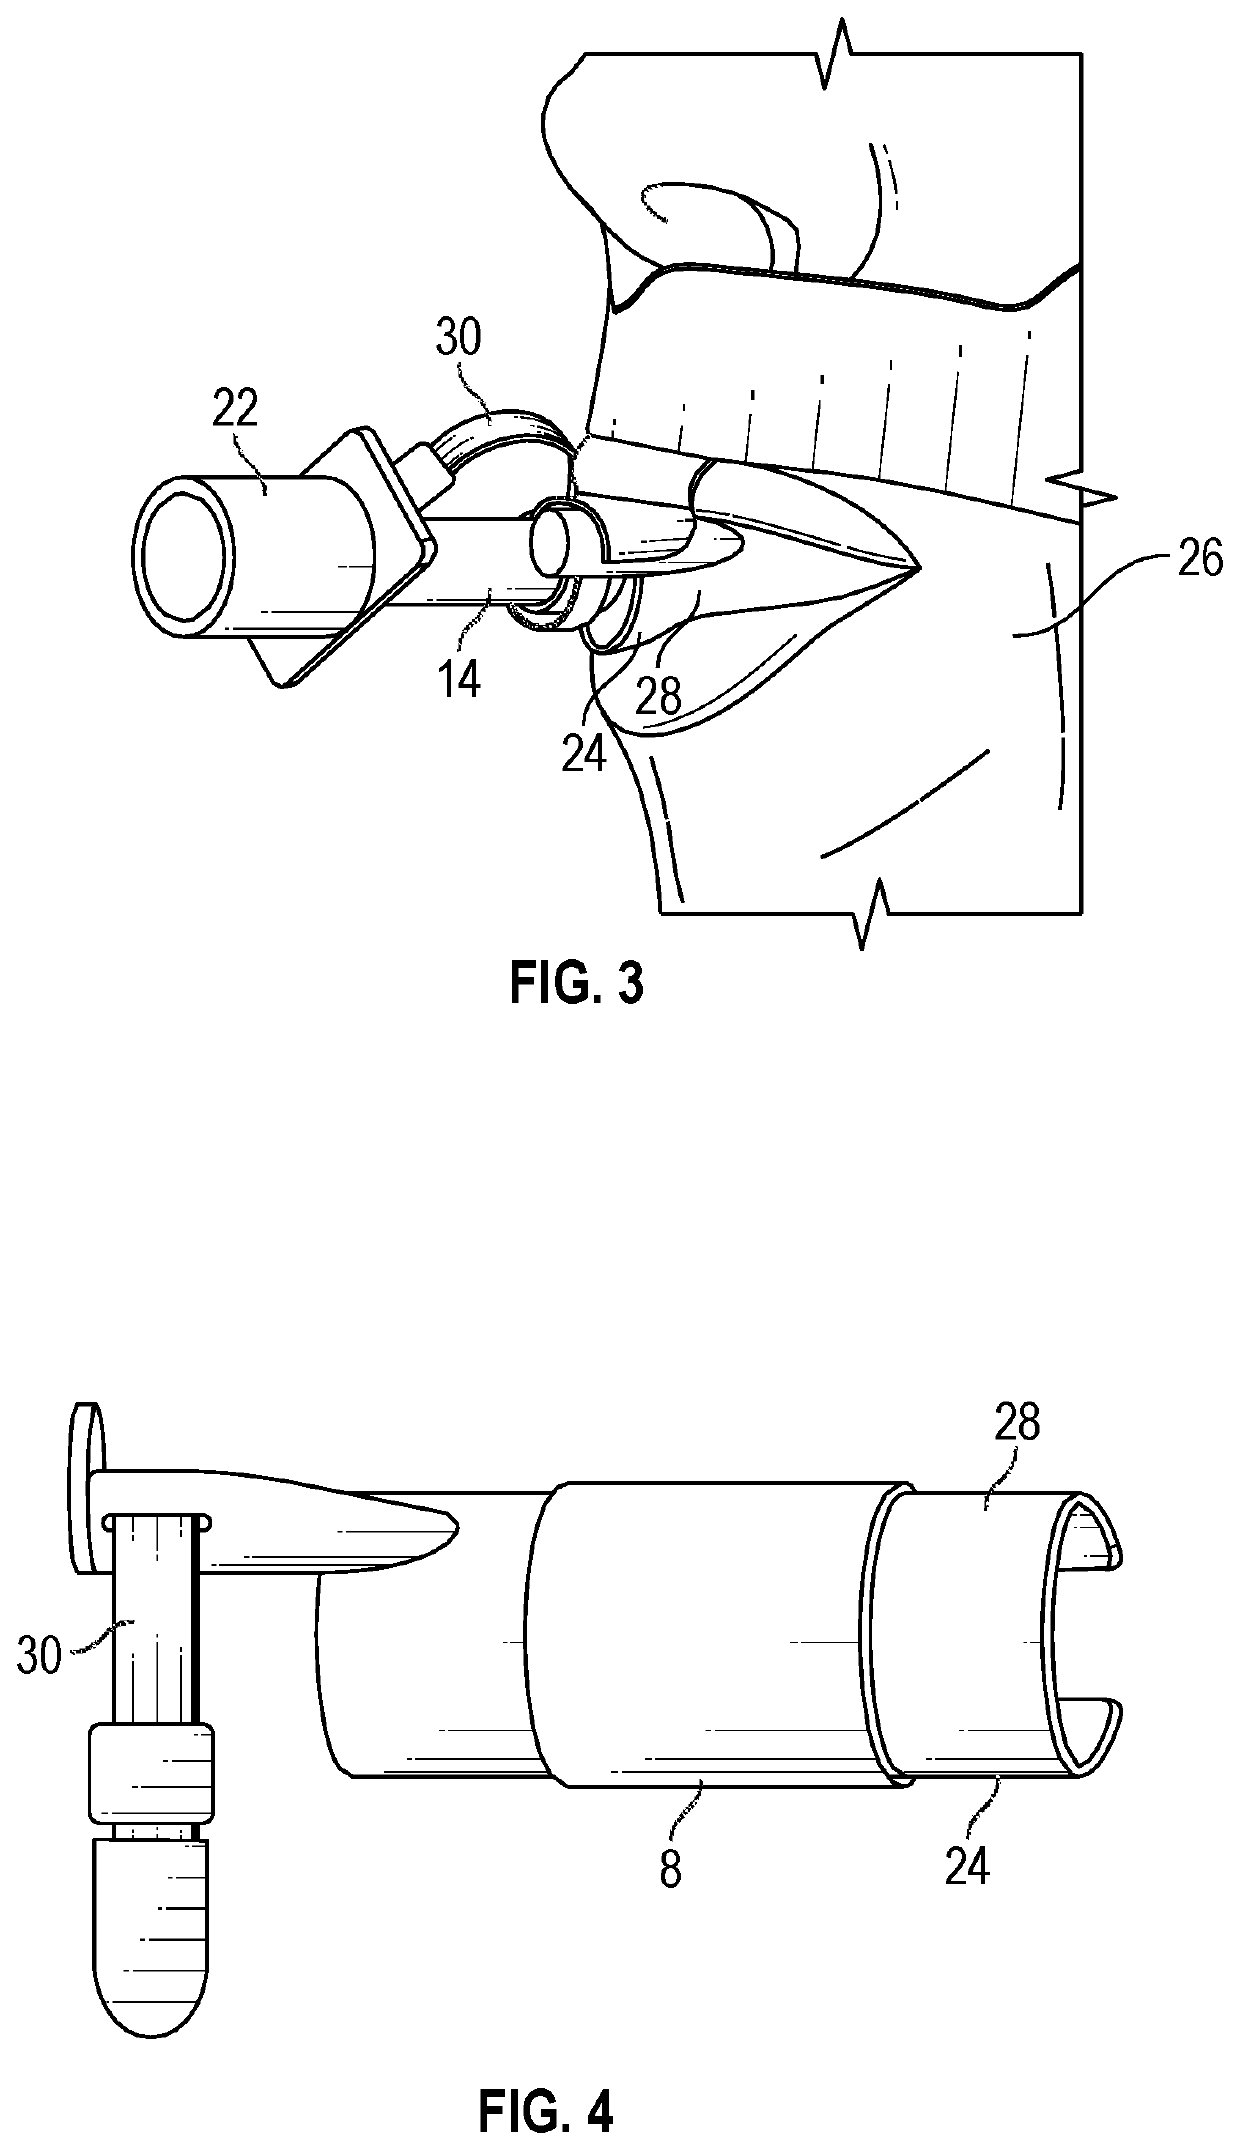 System and method for detecting agitation, discomfort and/or self-extubation during intubation